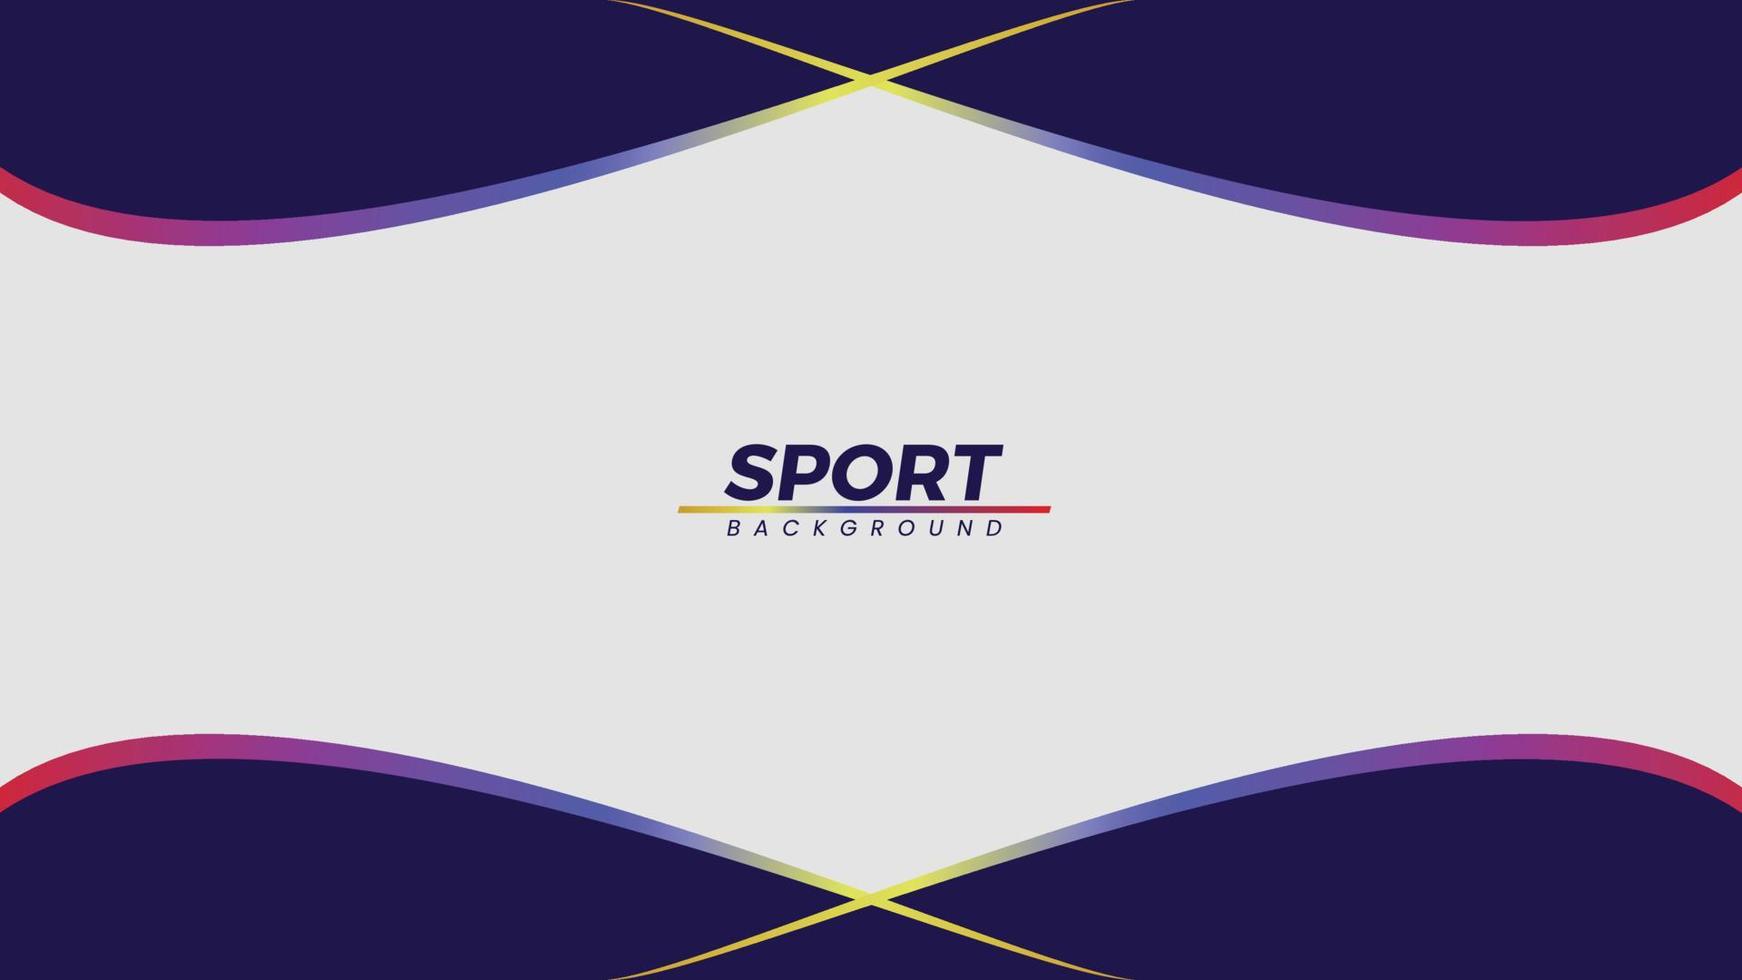 Elegant and Modern Stylish Background, Sports Themed With A Blend Of Purple Colors And Color Gradations. Suitable for Background Designs, Flyers, Posters, Social Media Posts, and other Design Template vector